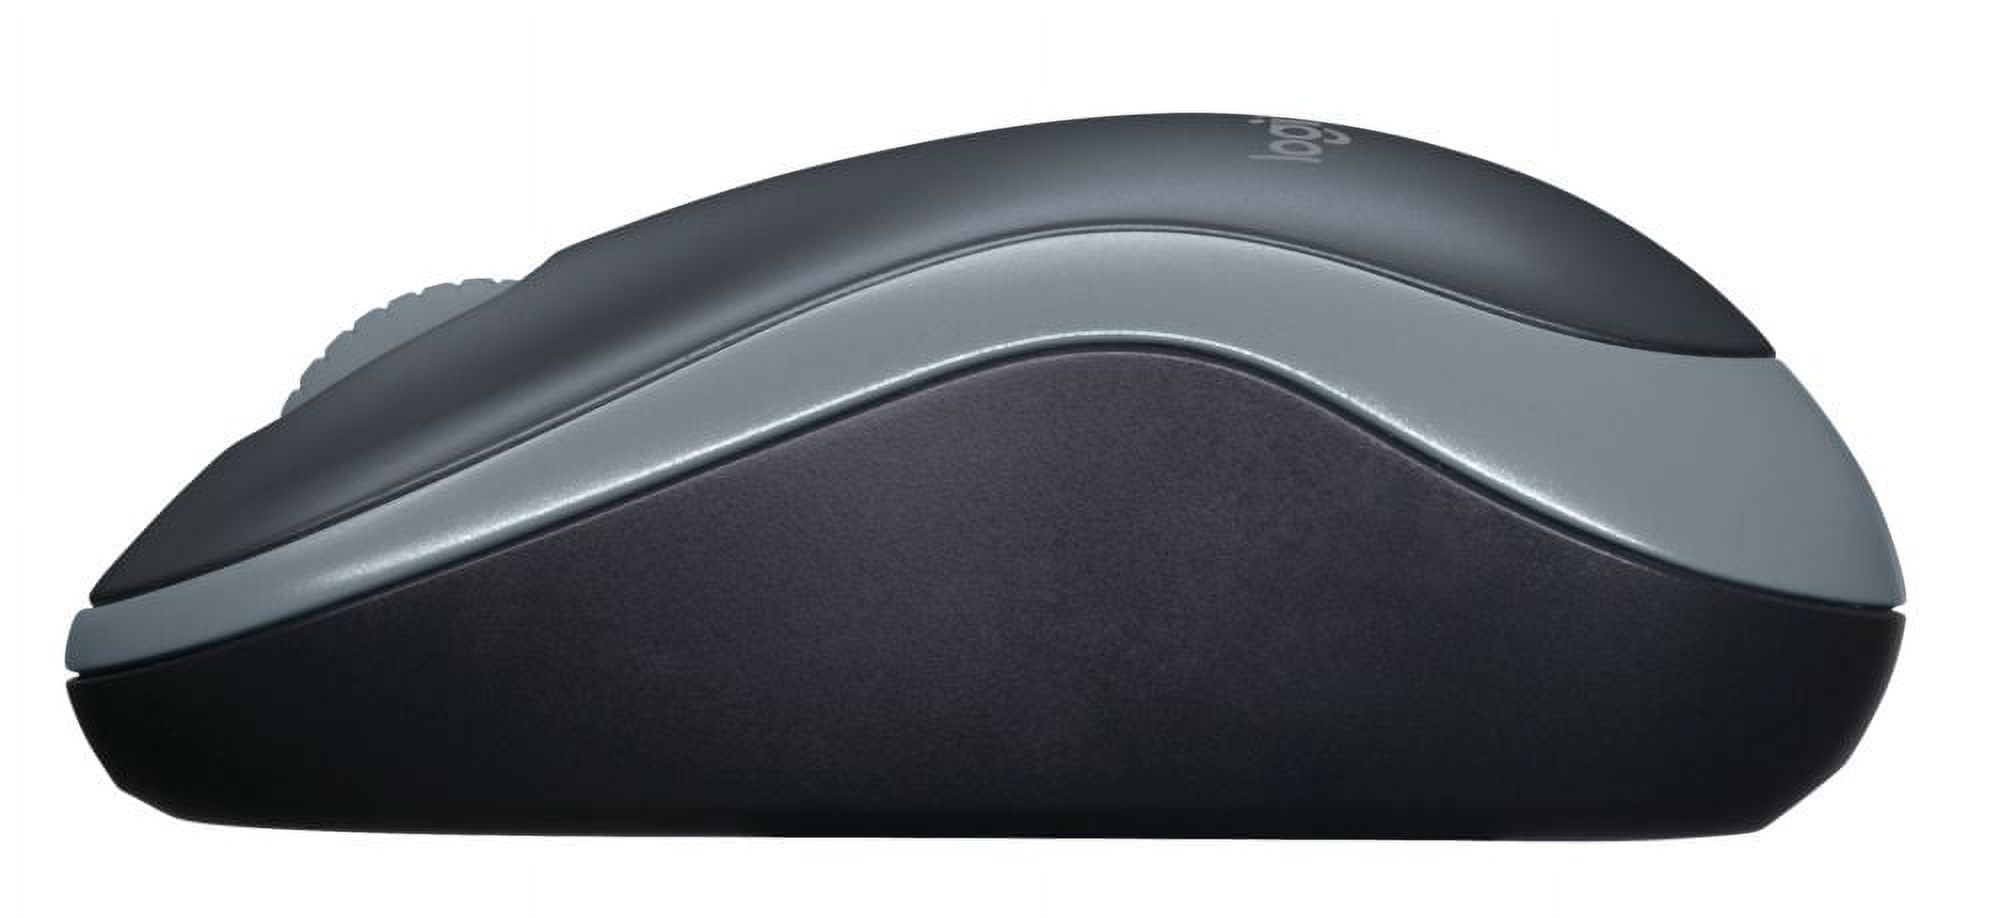 Logitech M185 Wireless Computer Mouse - image 2 of 4